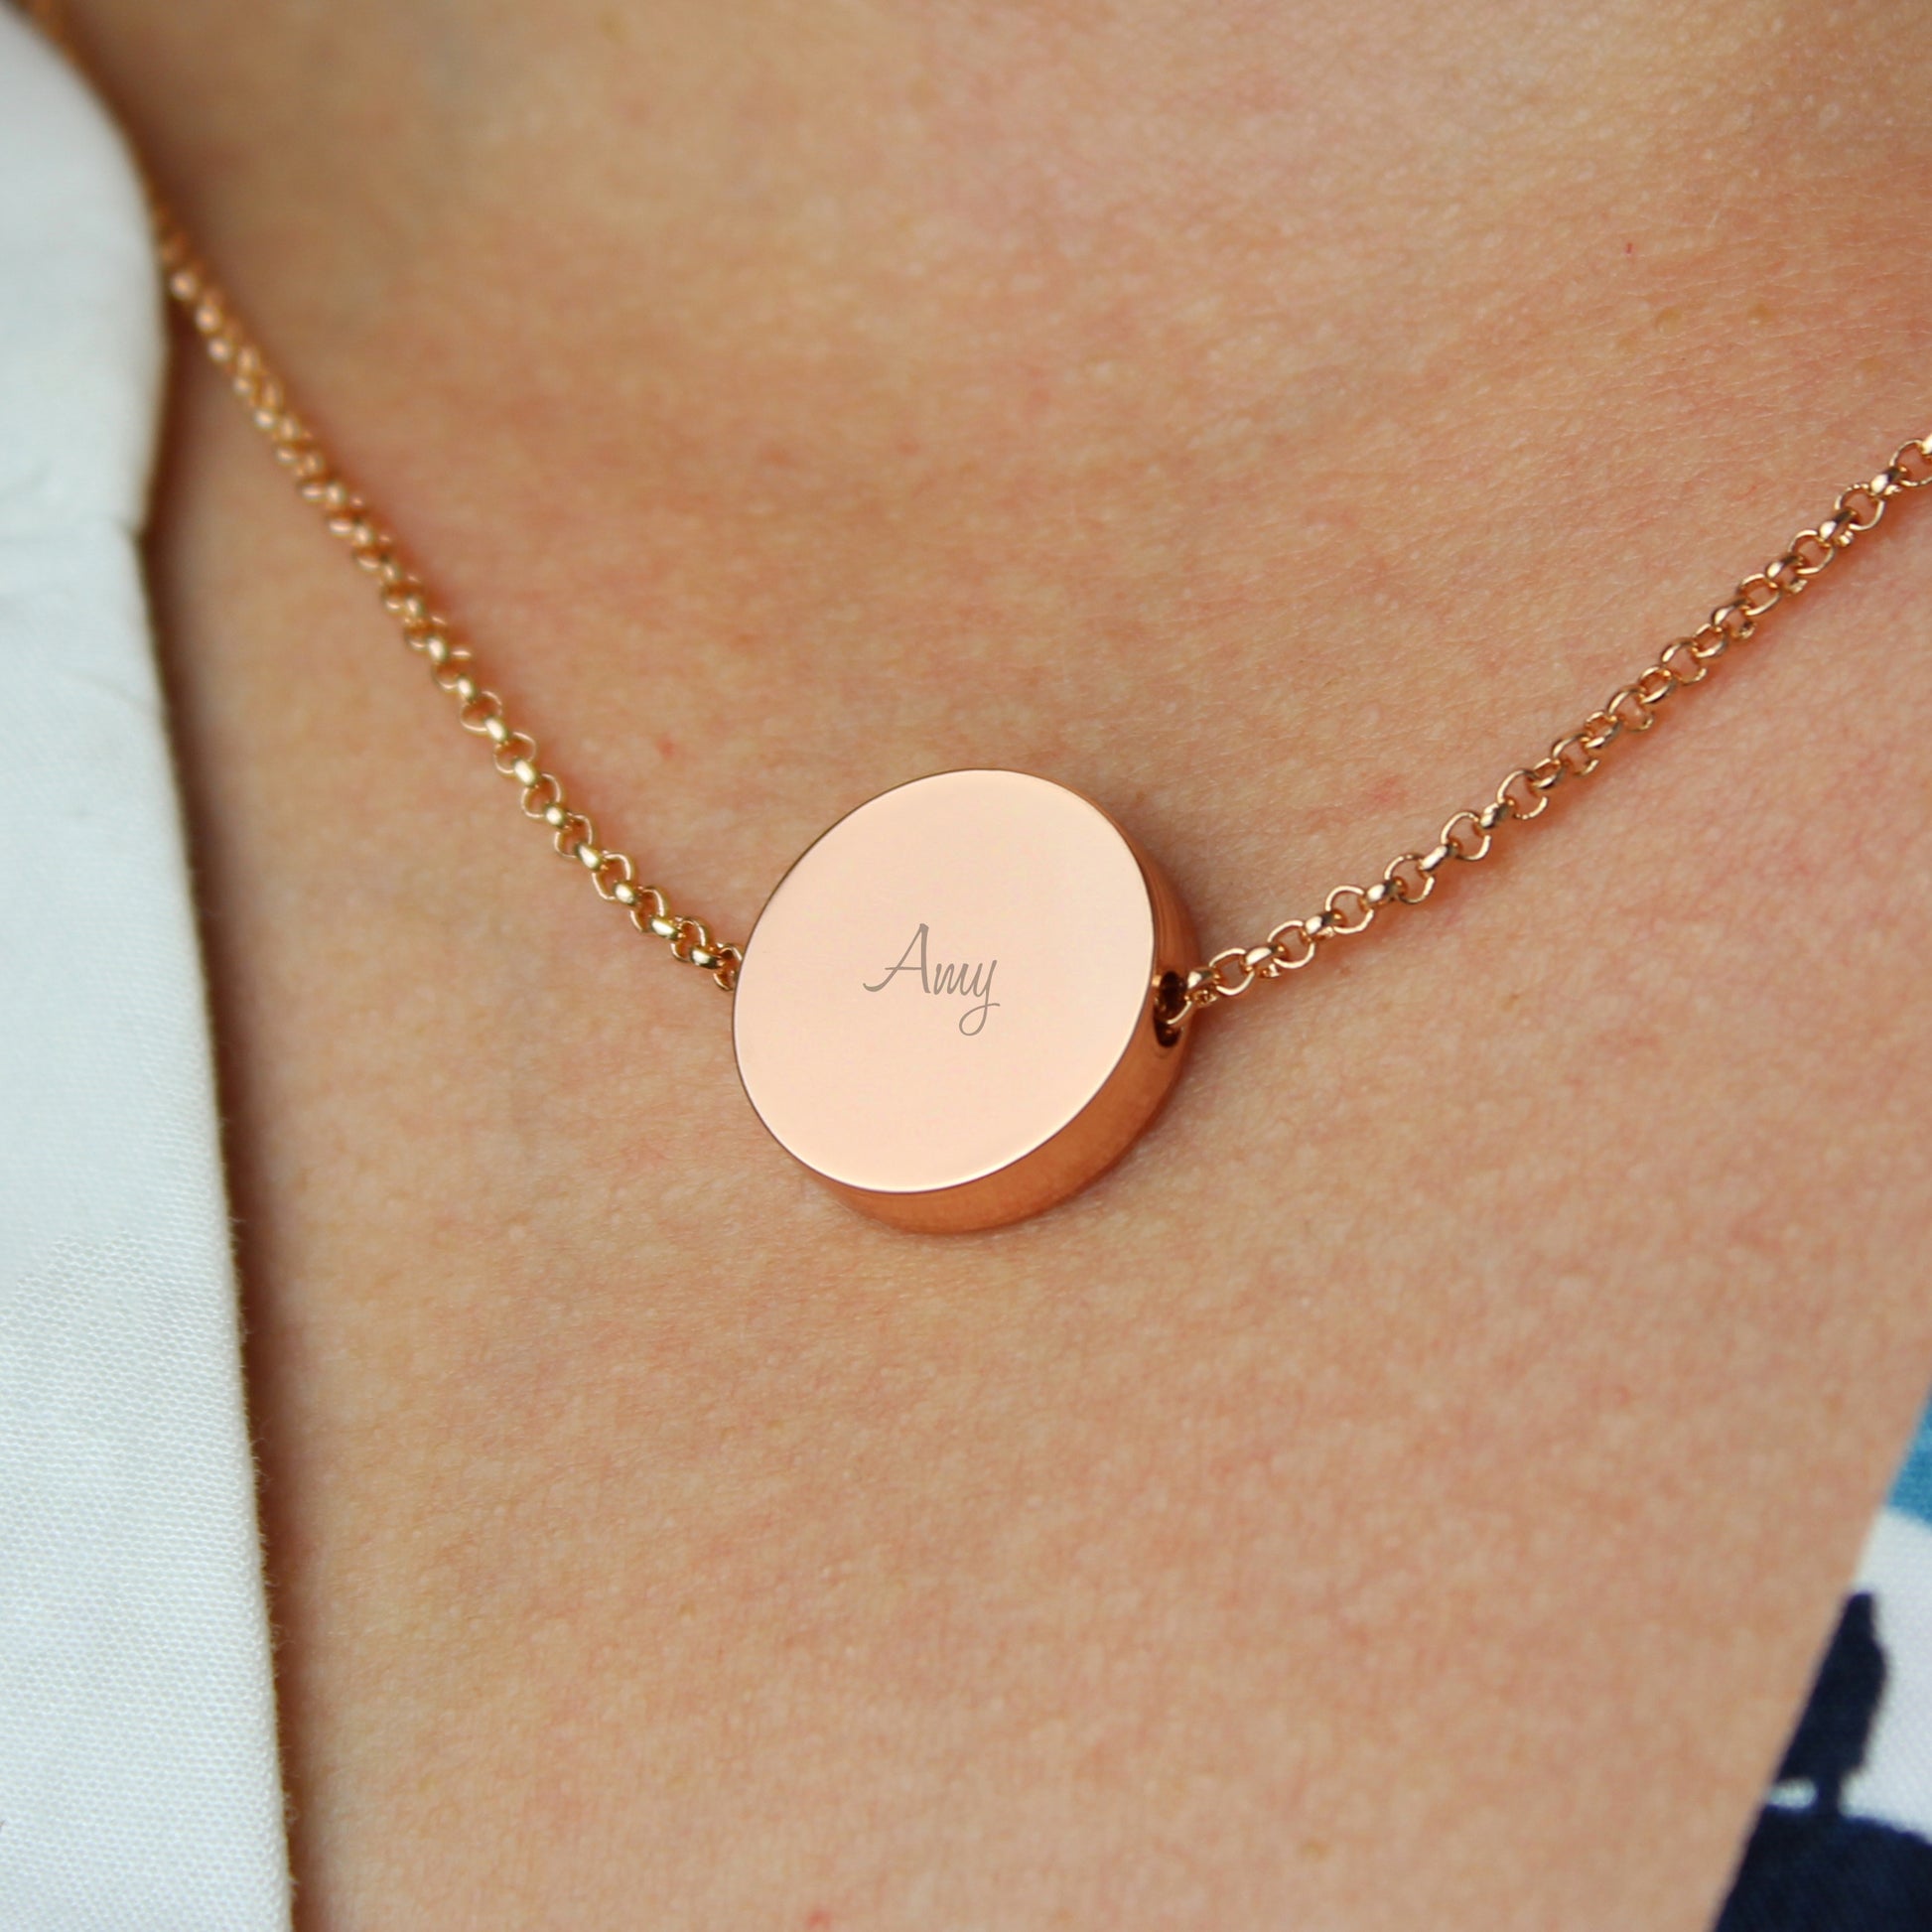 Rose gold tone disc necklace - Lilybet loves